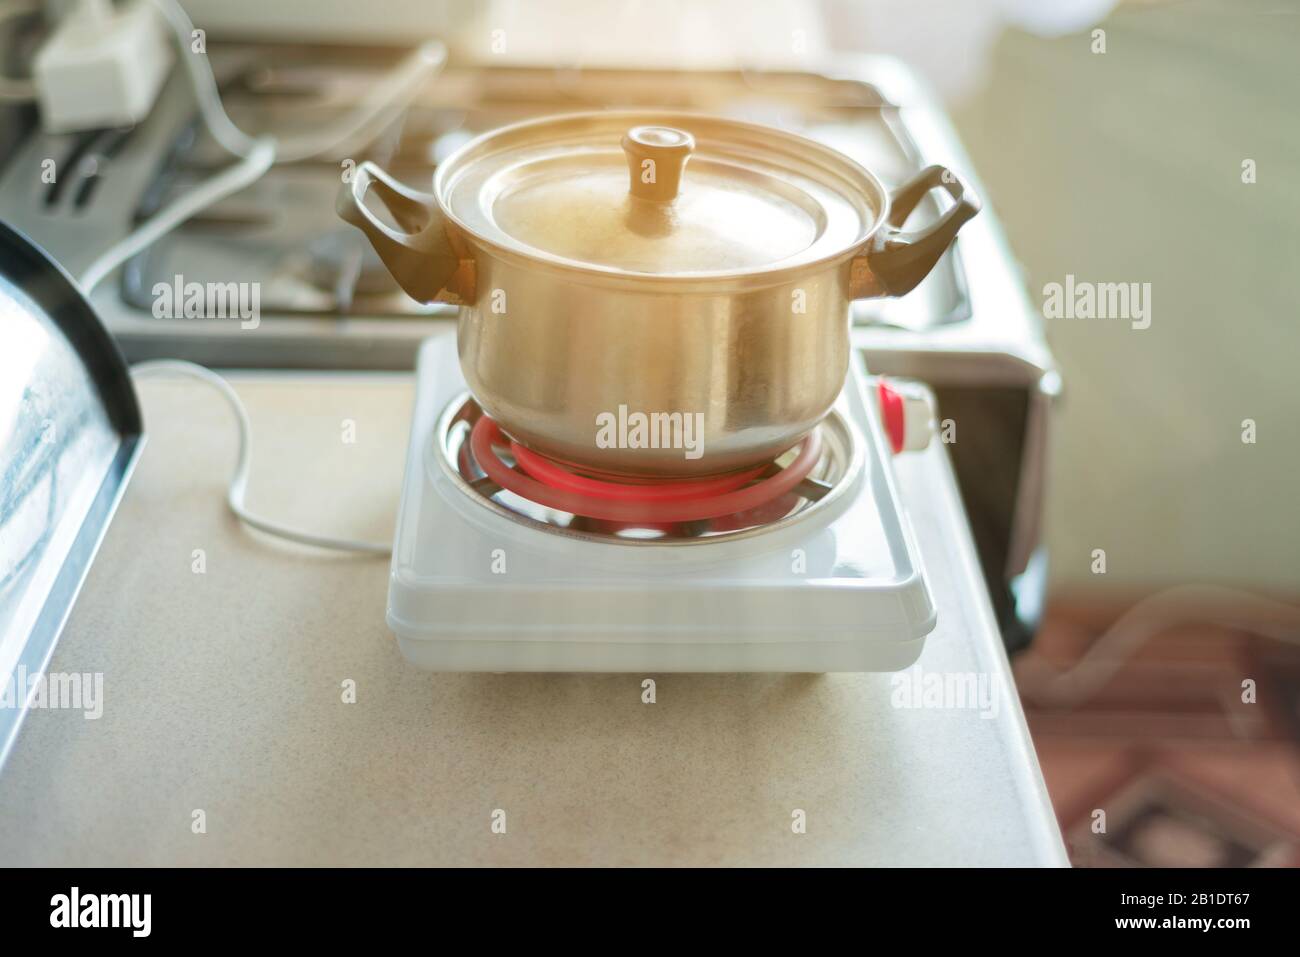 https://c8.alamy.com/comp/2B1DT67/small-electric-stove-for-cooking-portable-household-appliances-food-prepared-in-the-home-kitchen-when-there-is-no-gas-2B1DT67.jpg